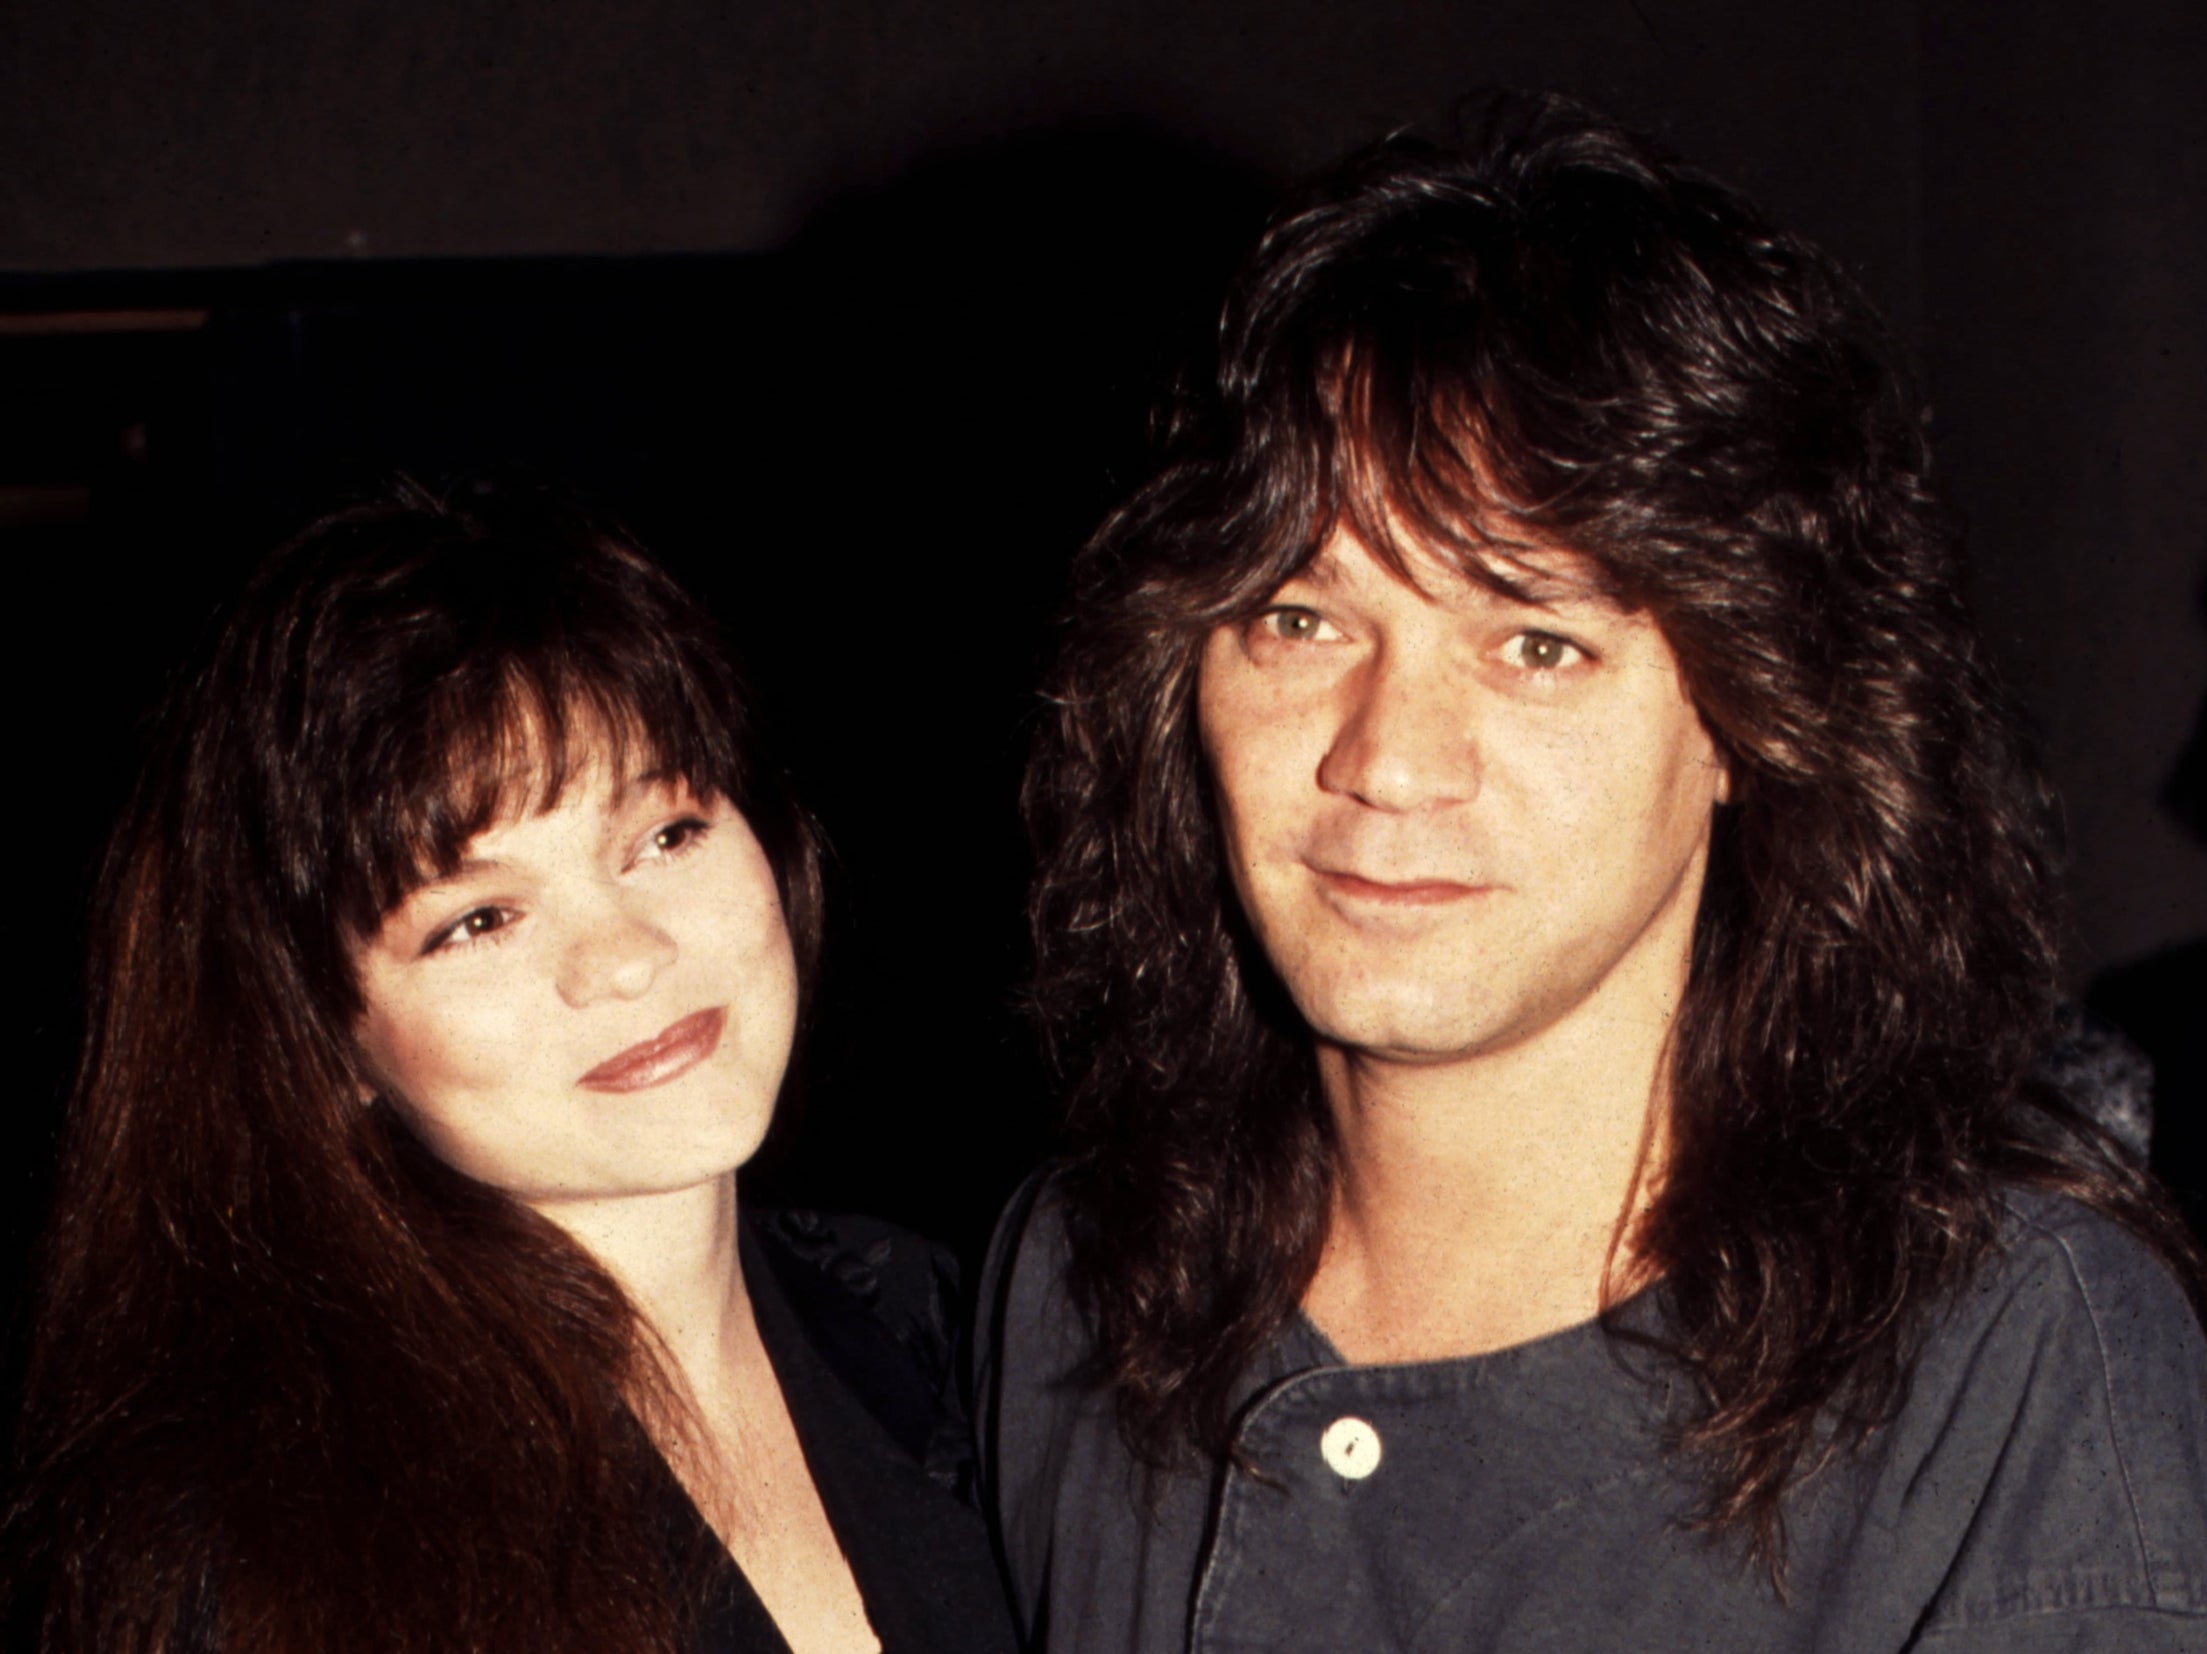 I loved his soul Valerie Bertinelli reflects on last goodbye to Eddie Van Halen The Independent